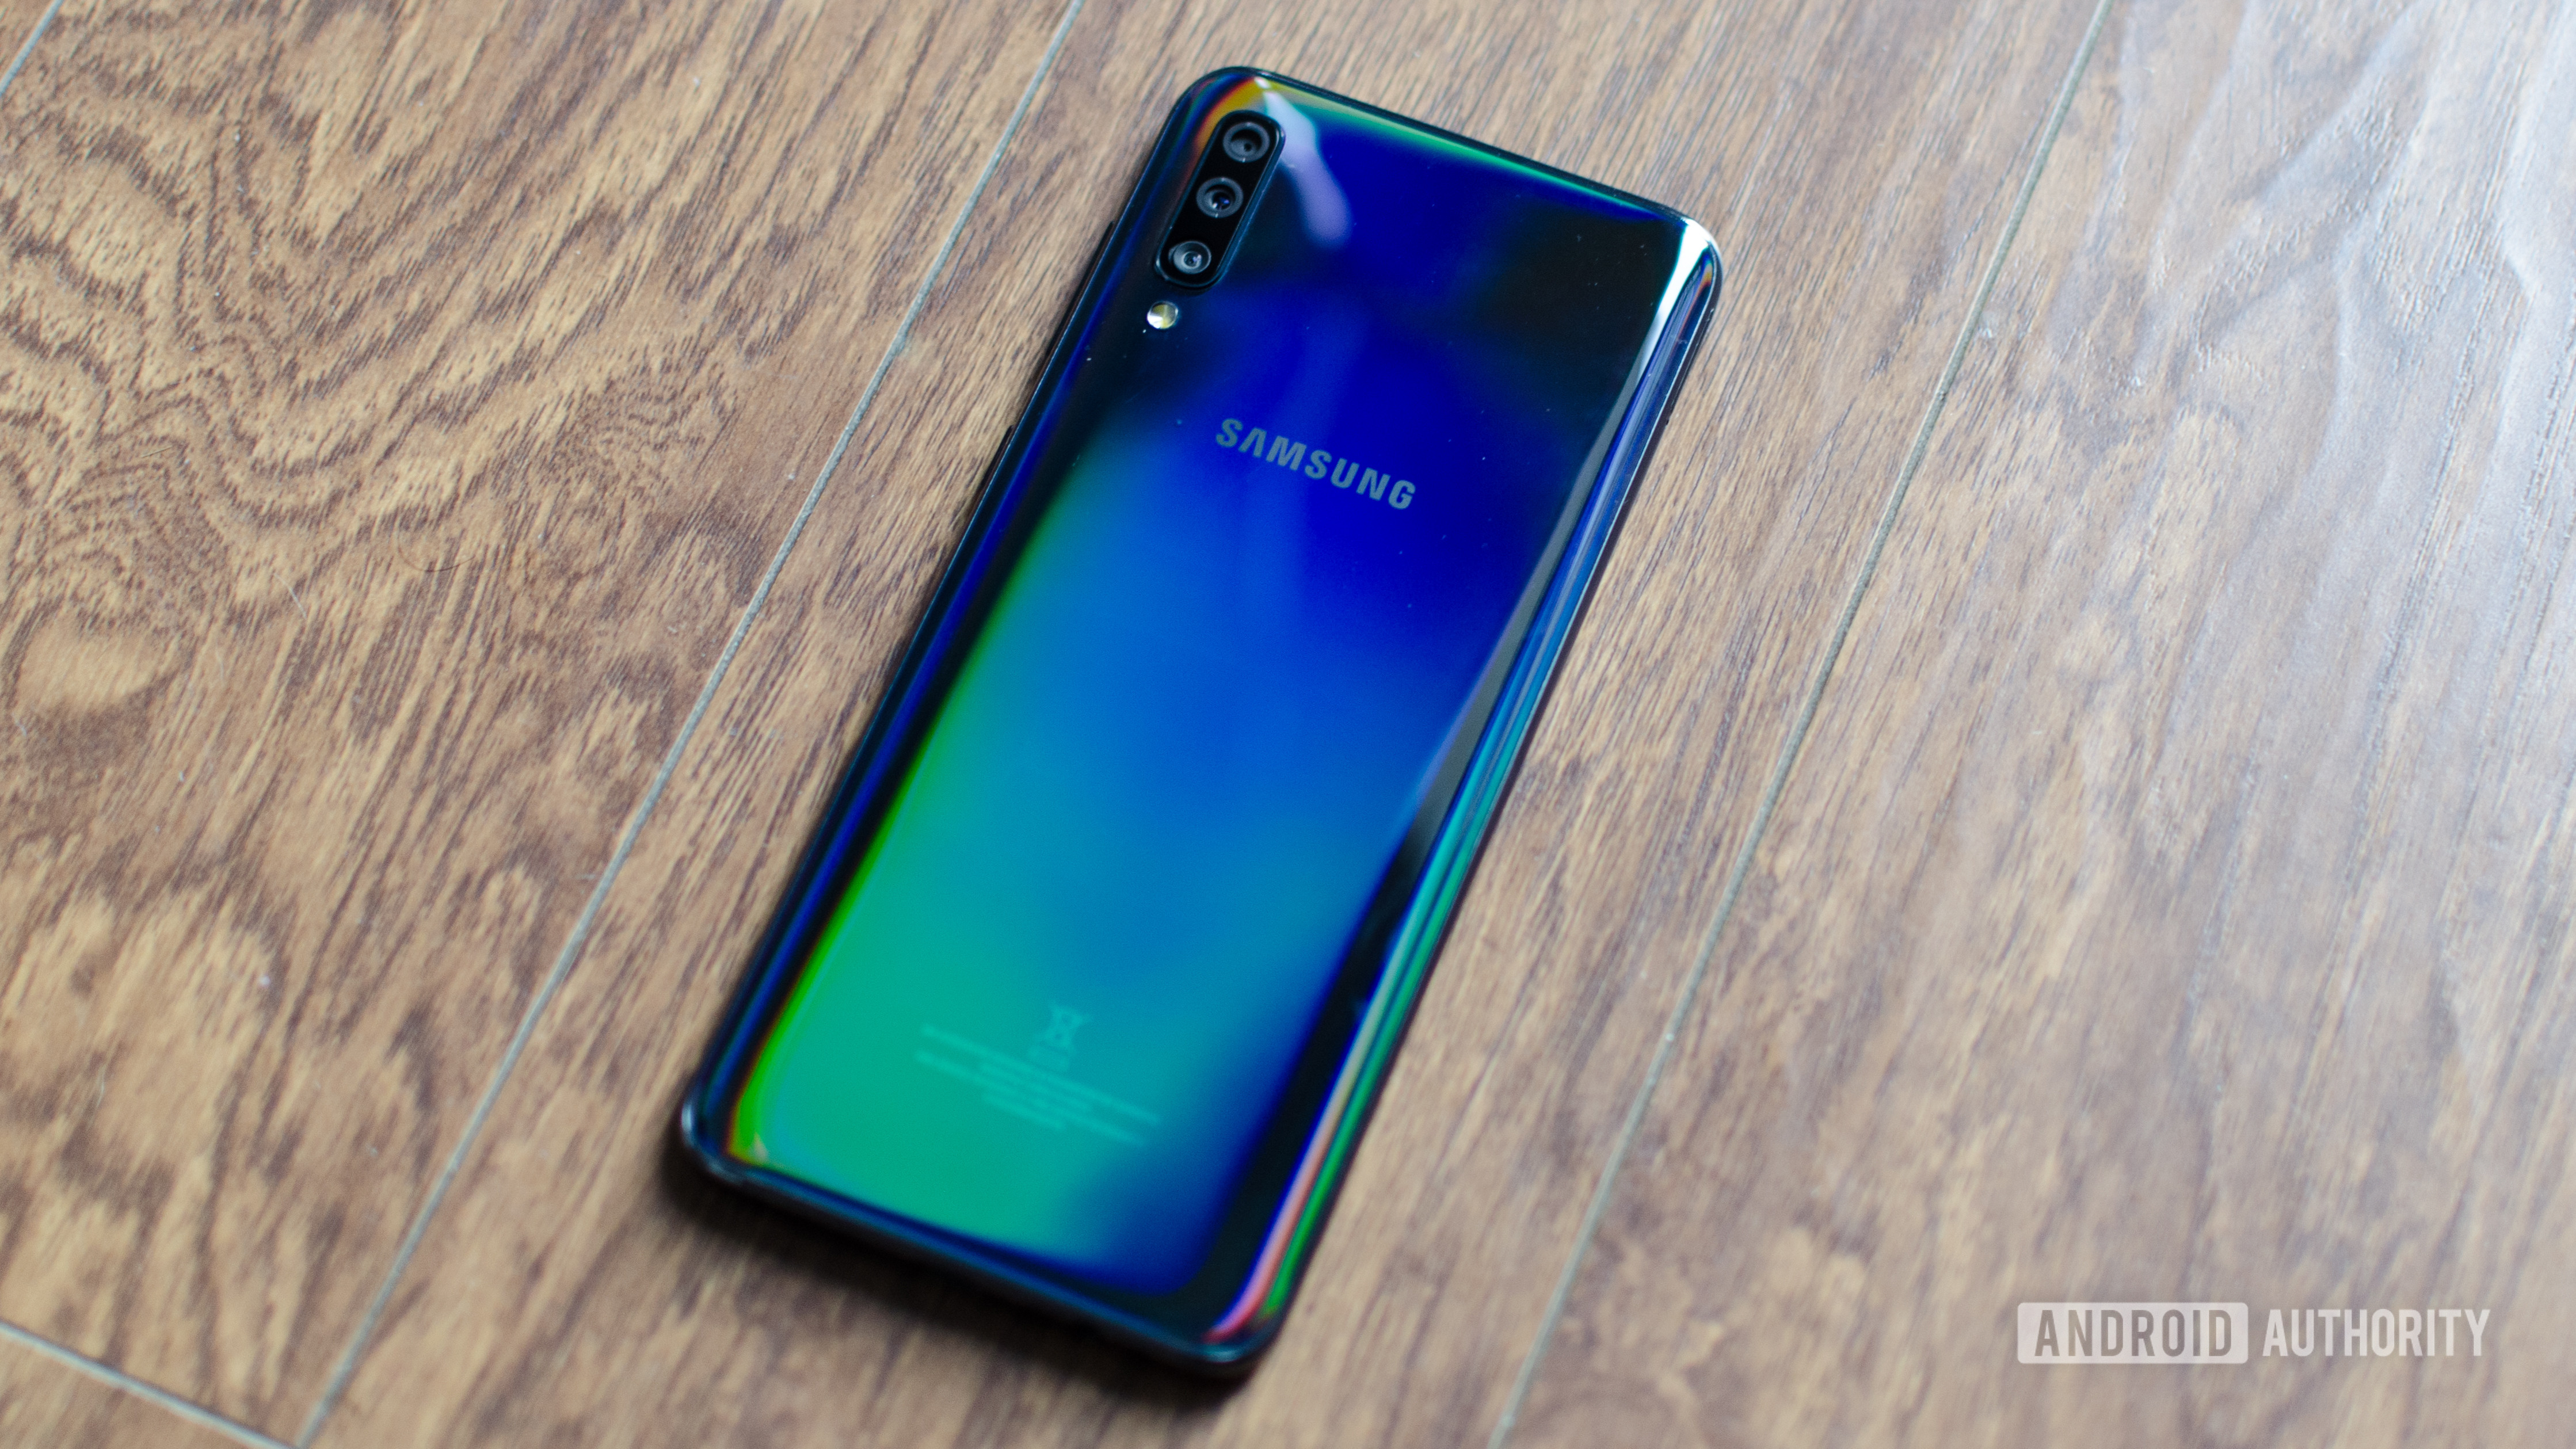 Samsung Galaxy A70 feature image of back